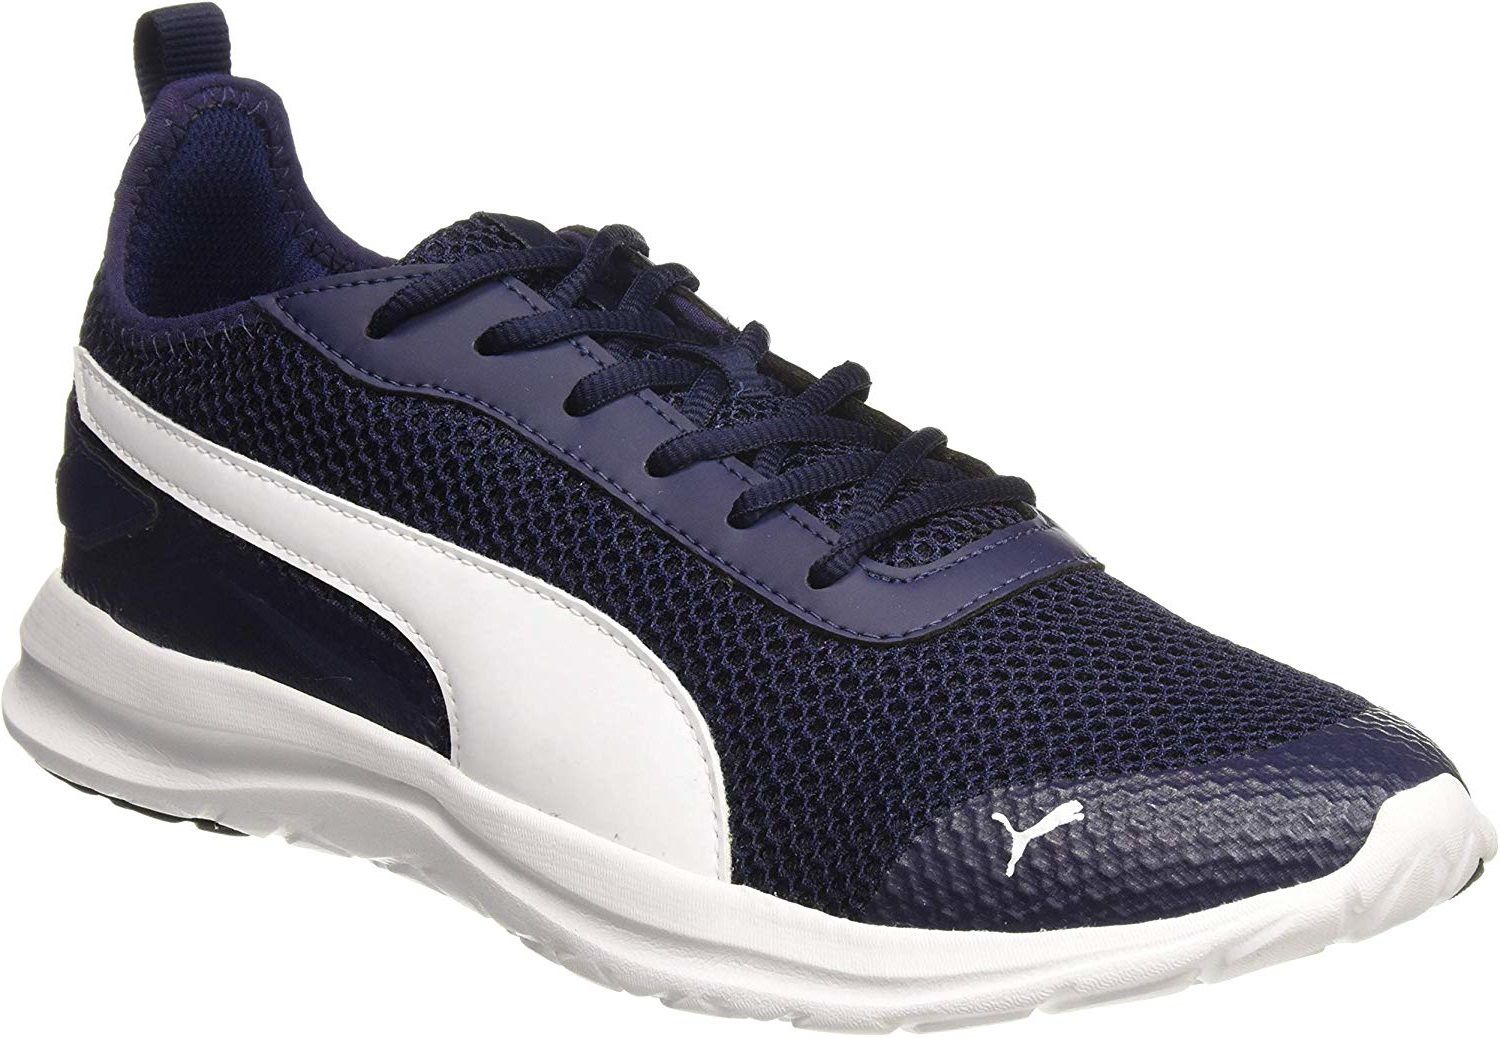 Puma Navy Running Shoes - Buy Puma Navy Running Shoes Online at Best ...